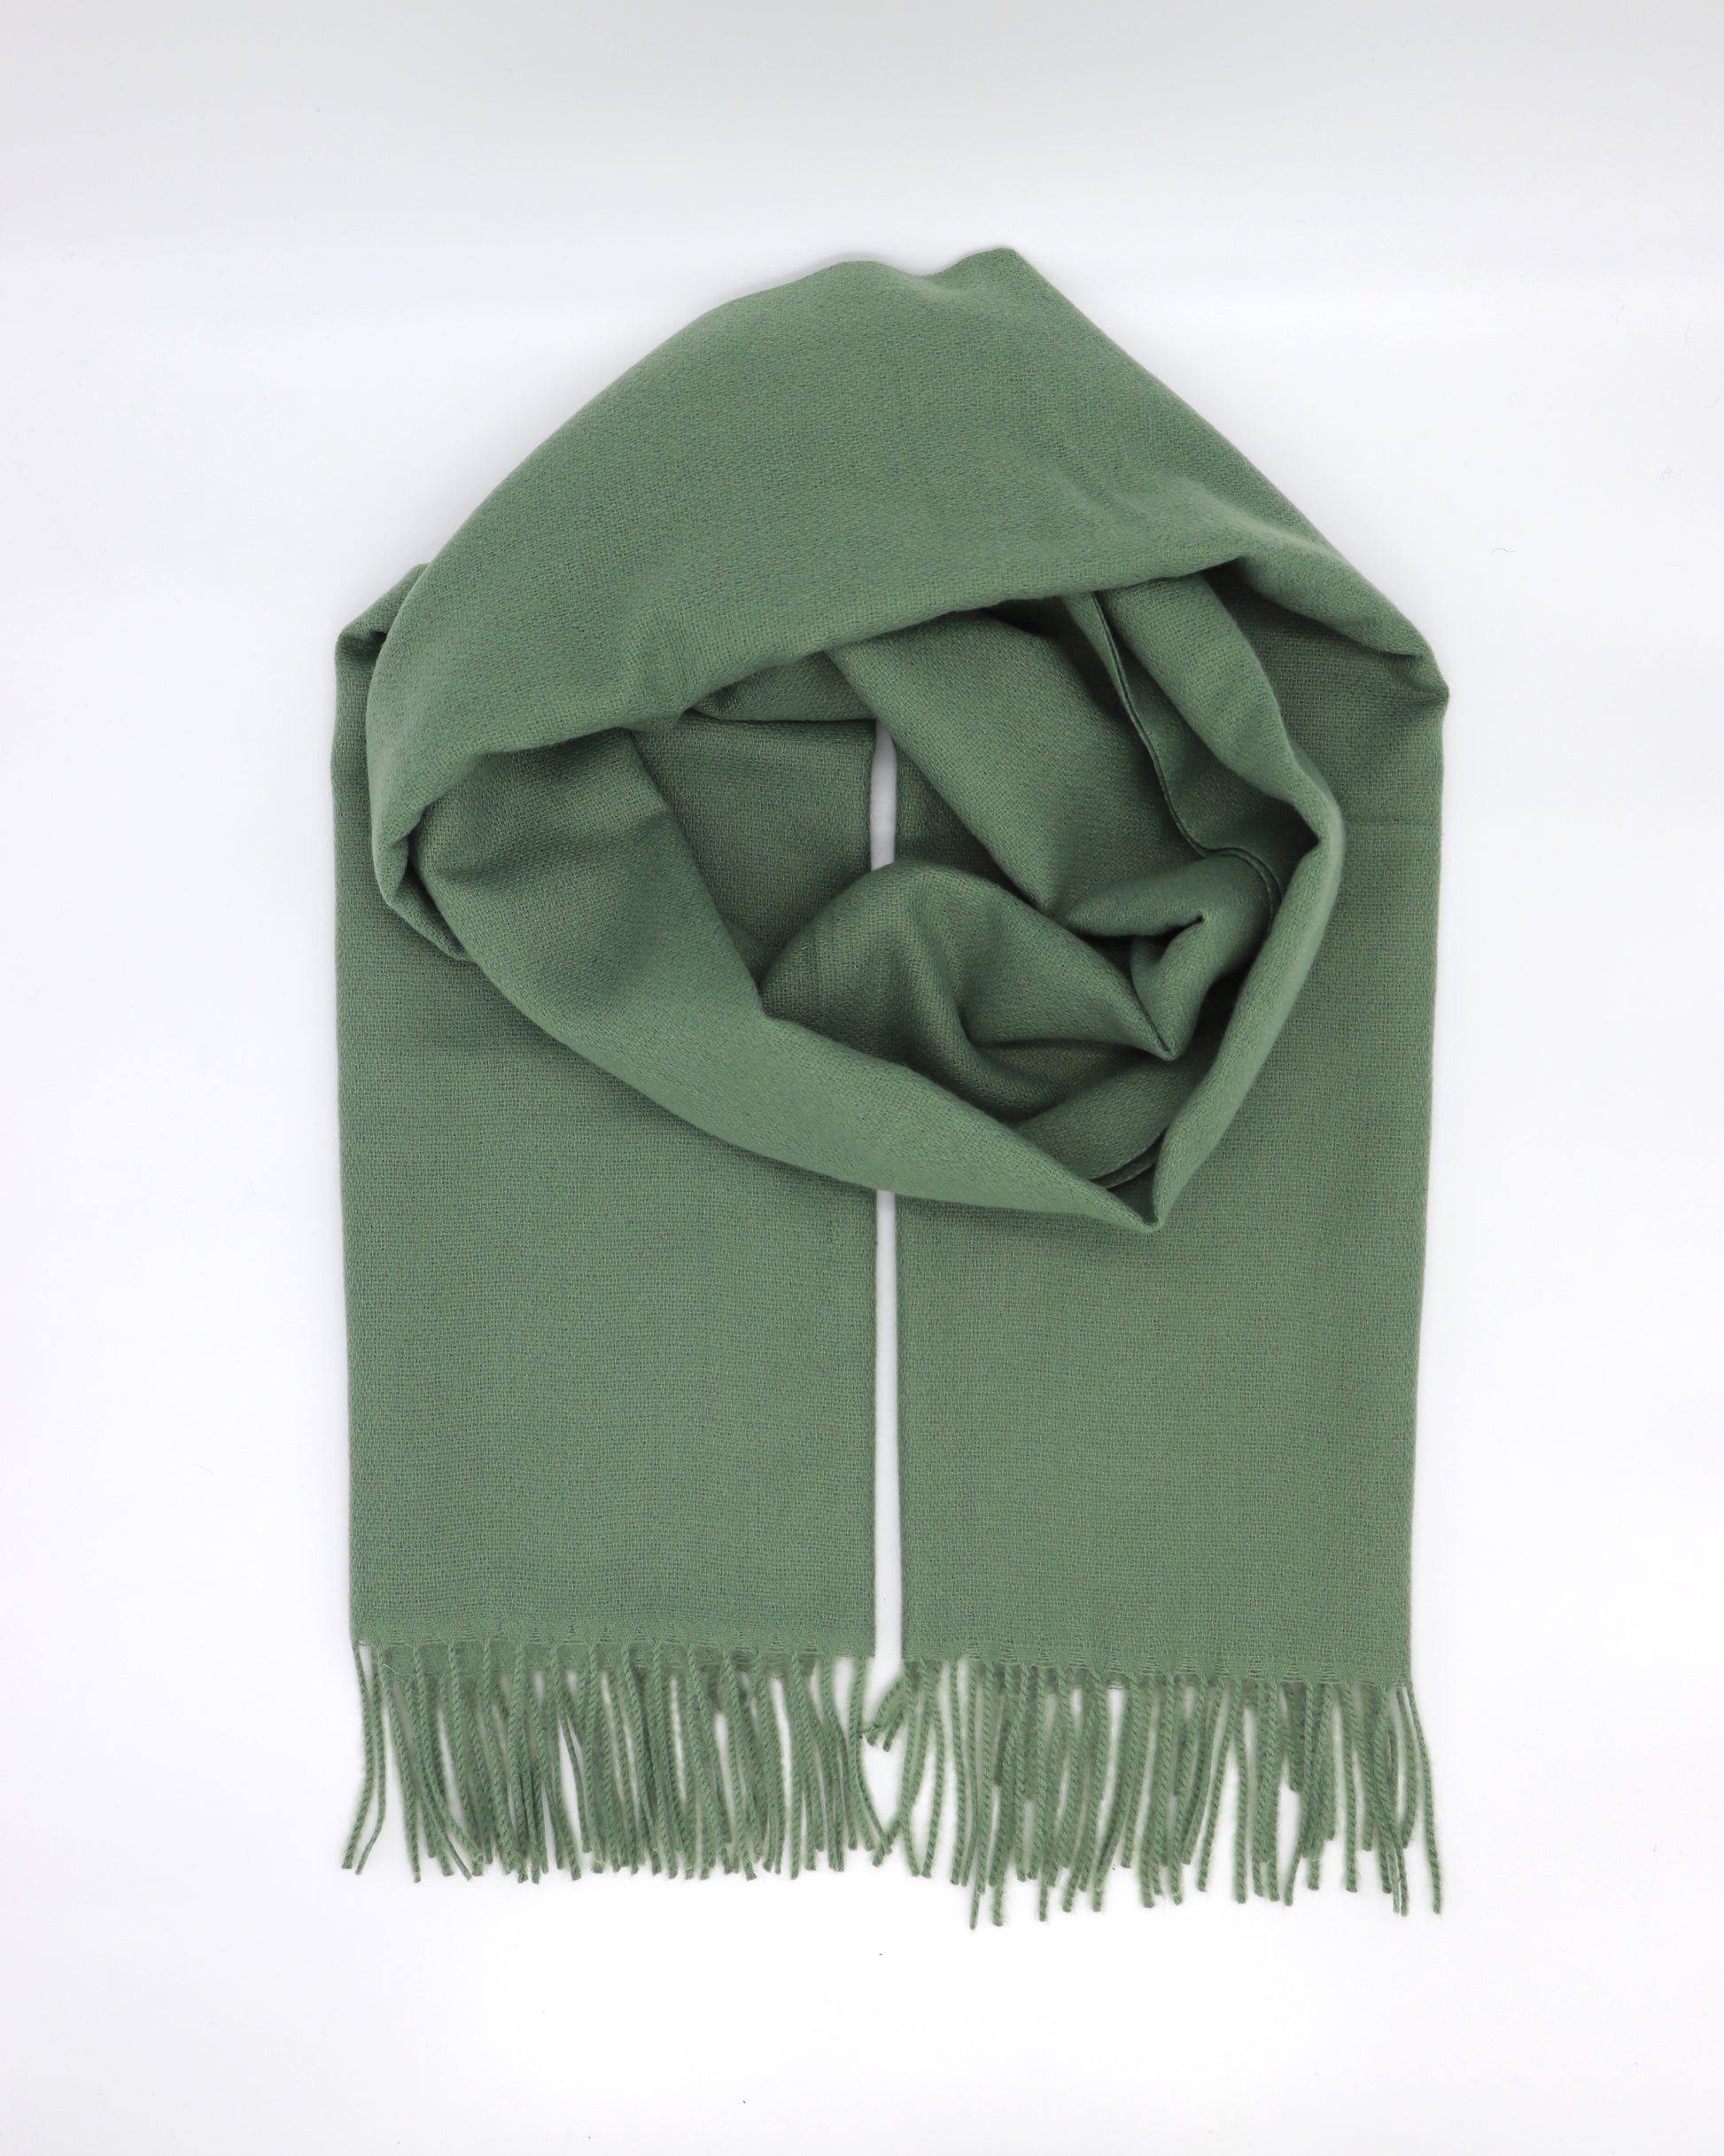 This Scarf is a finest XL-Size soft scarf from Villanelle. A luxurious accessory for women made from the softest wool and cashmere blend for extreme comfort and warmth. It is made in a trendy olive green color for a great look and feeling. A cozy accessory for cold winter, autumn and spring days. This product is sourced and manufactured in Poland.